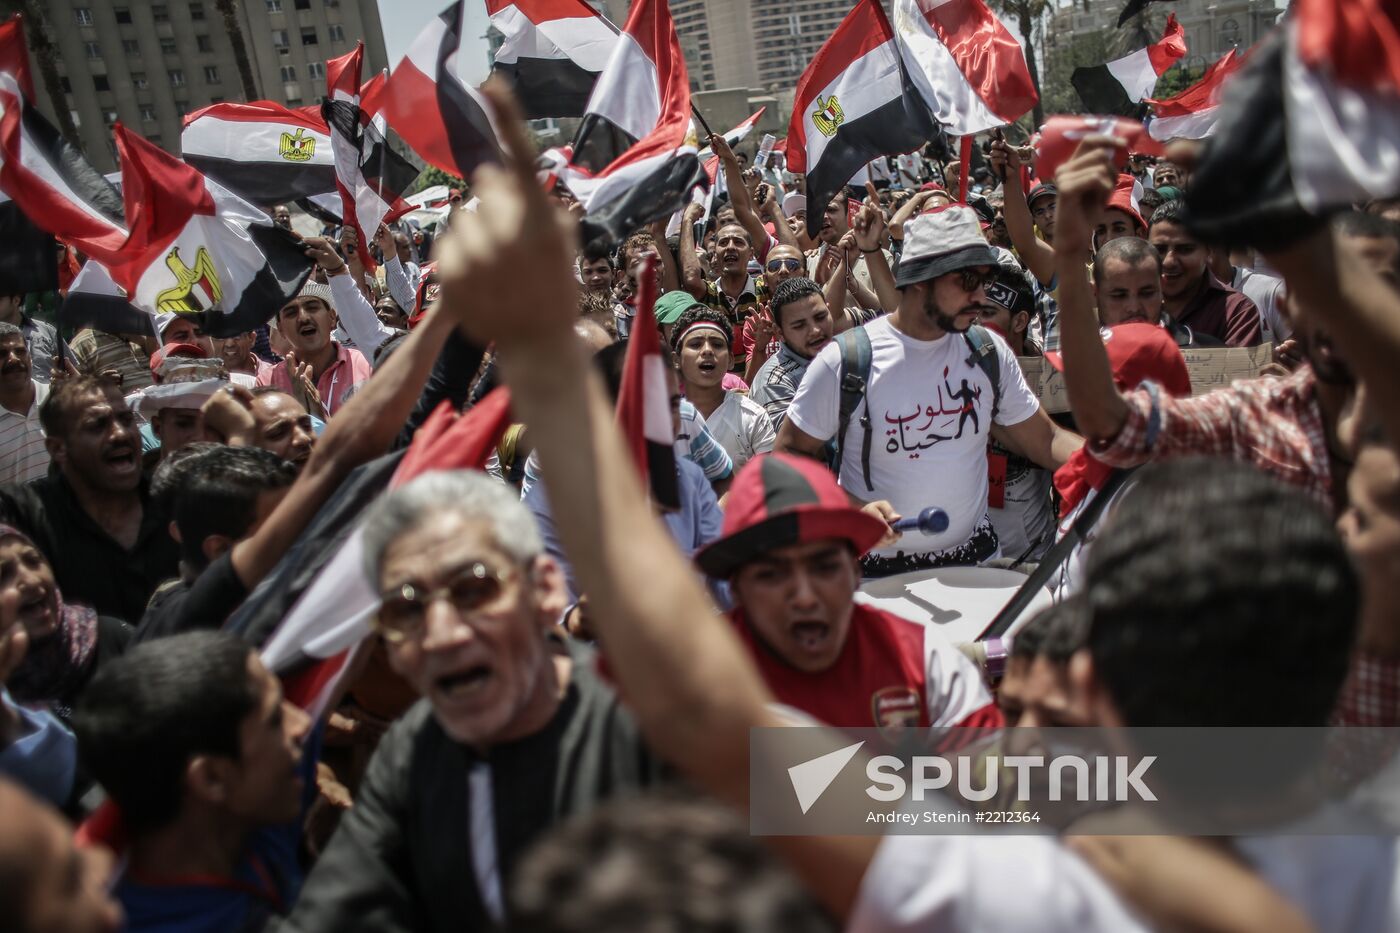 Rallies of supporters and opponents of President Morsi in Cairo